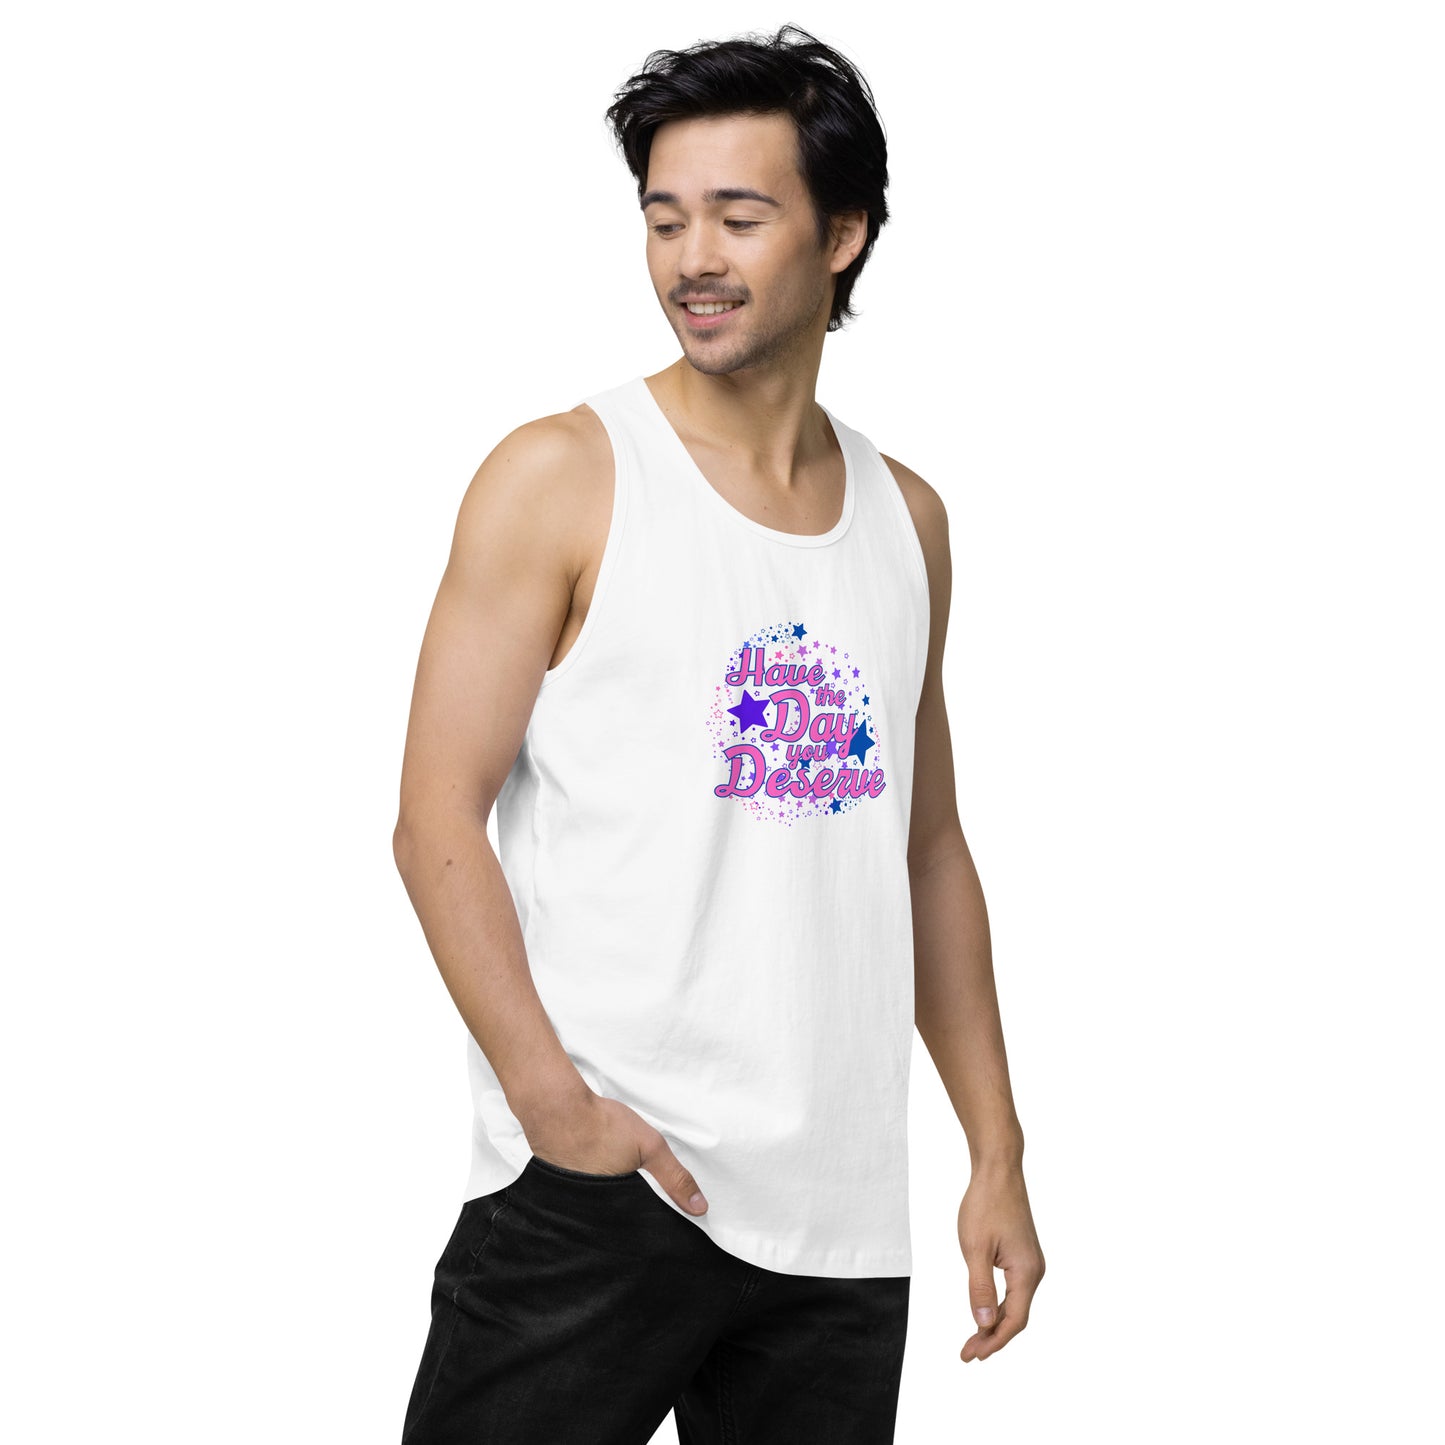 Have The Day You Deserve - Unisex premium tank top